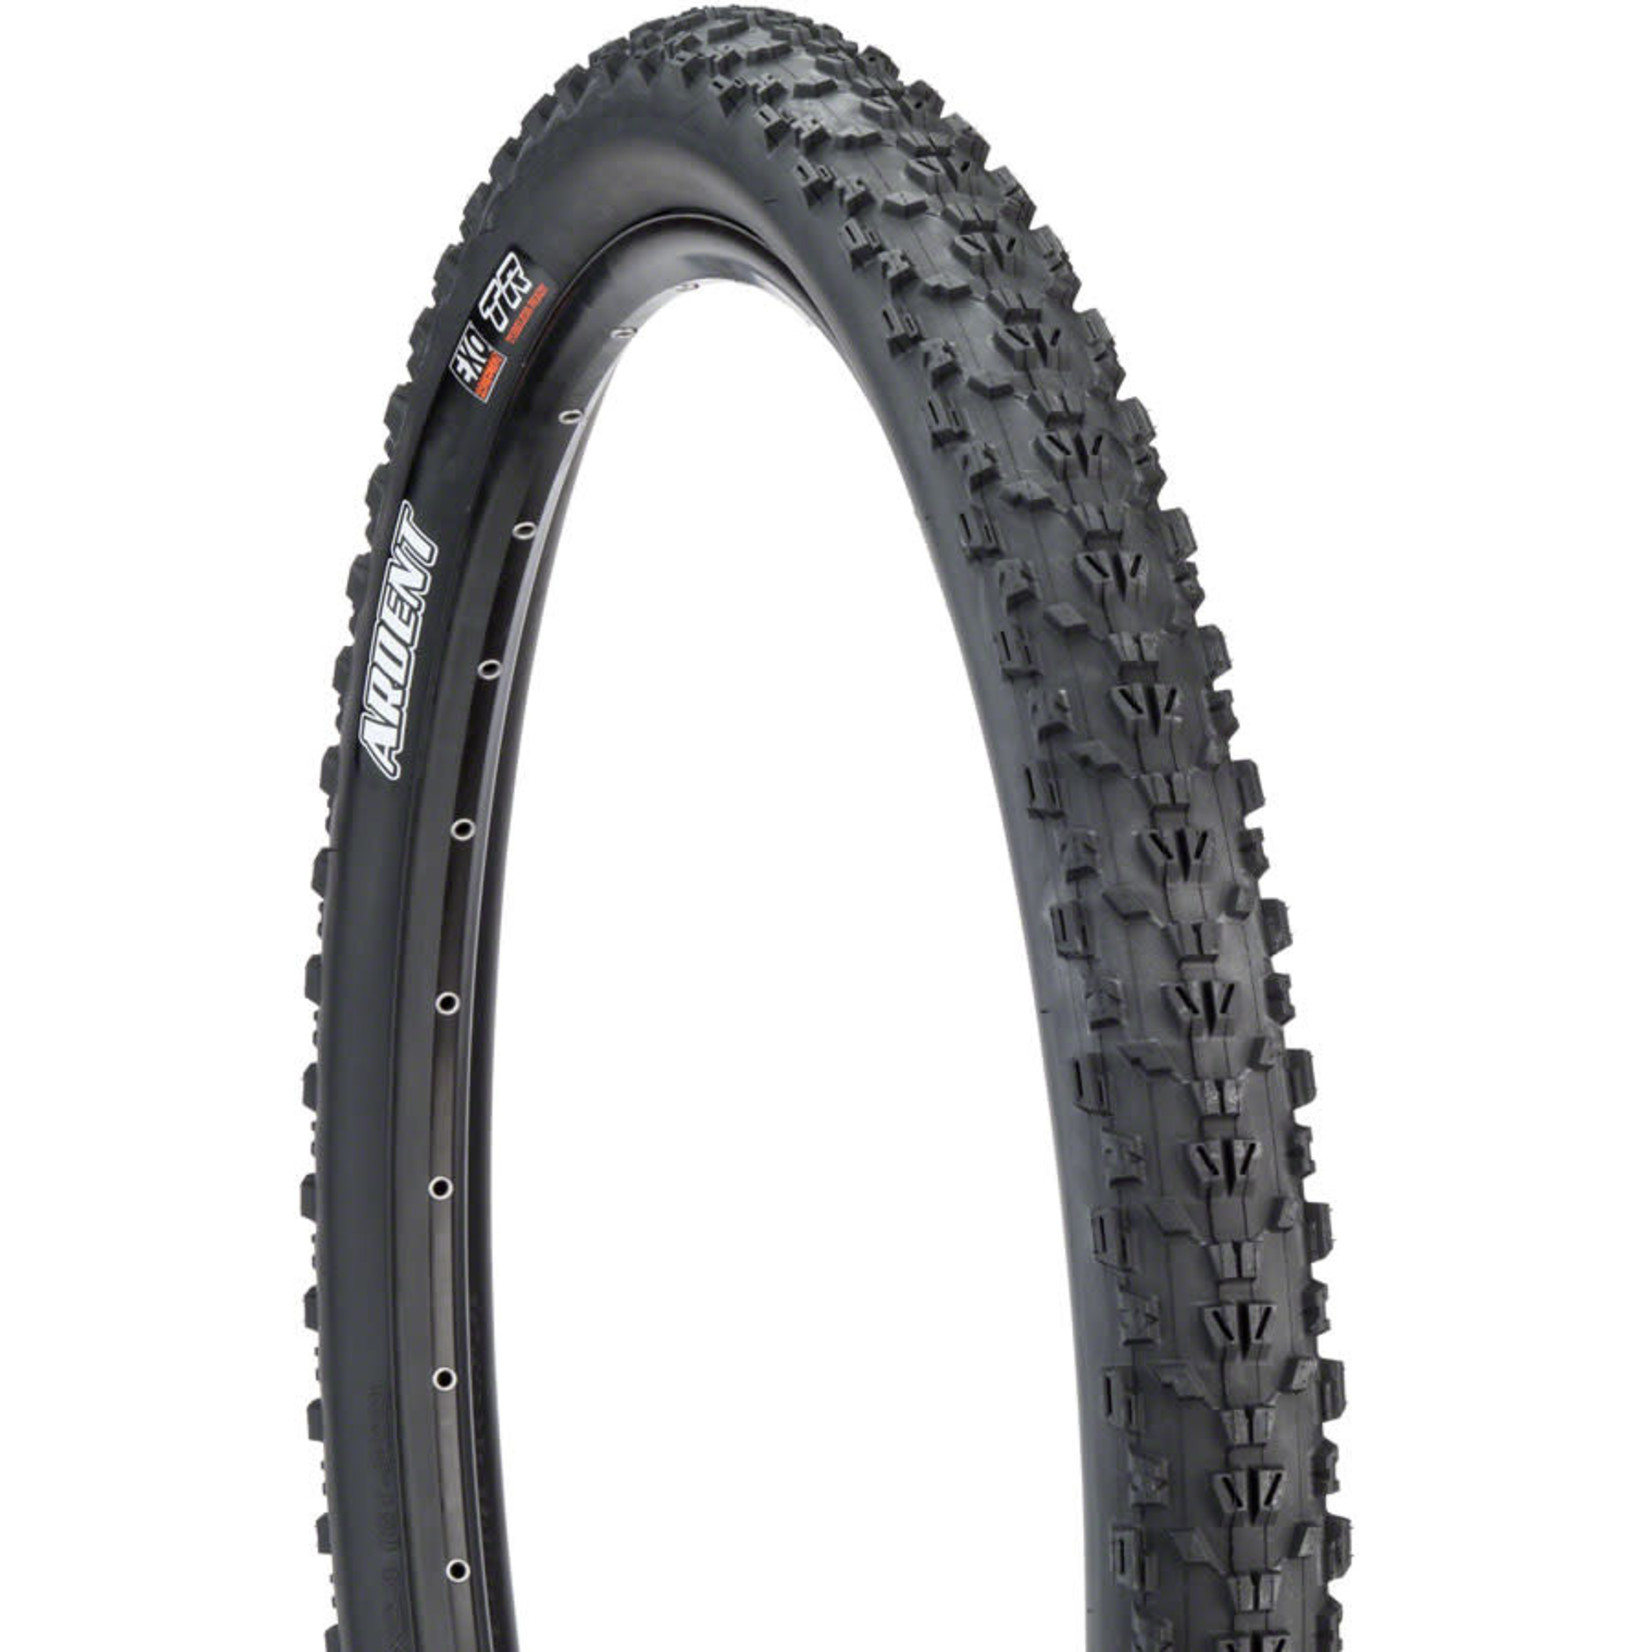 Maxxis Maxxis Ardent 29 x 2.25 EXO Tubeless Ready Tire